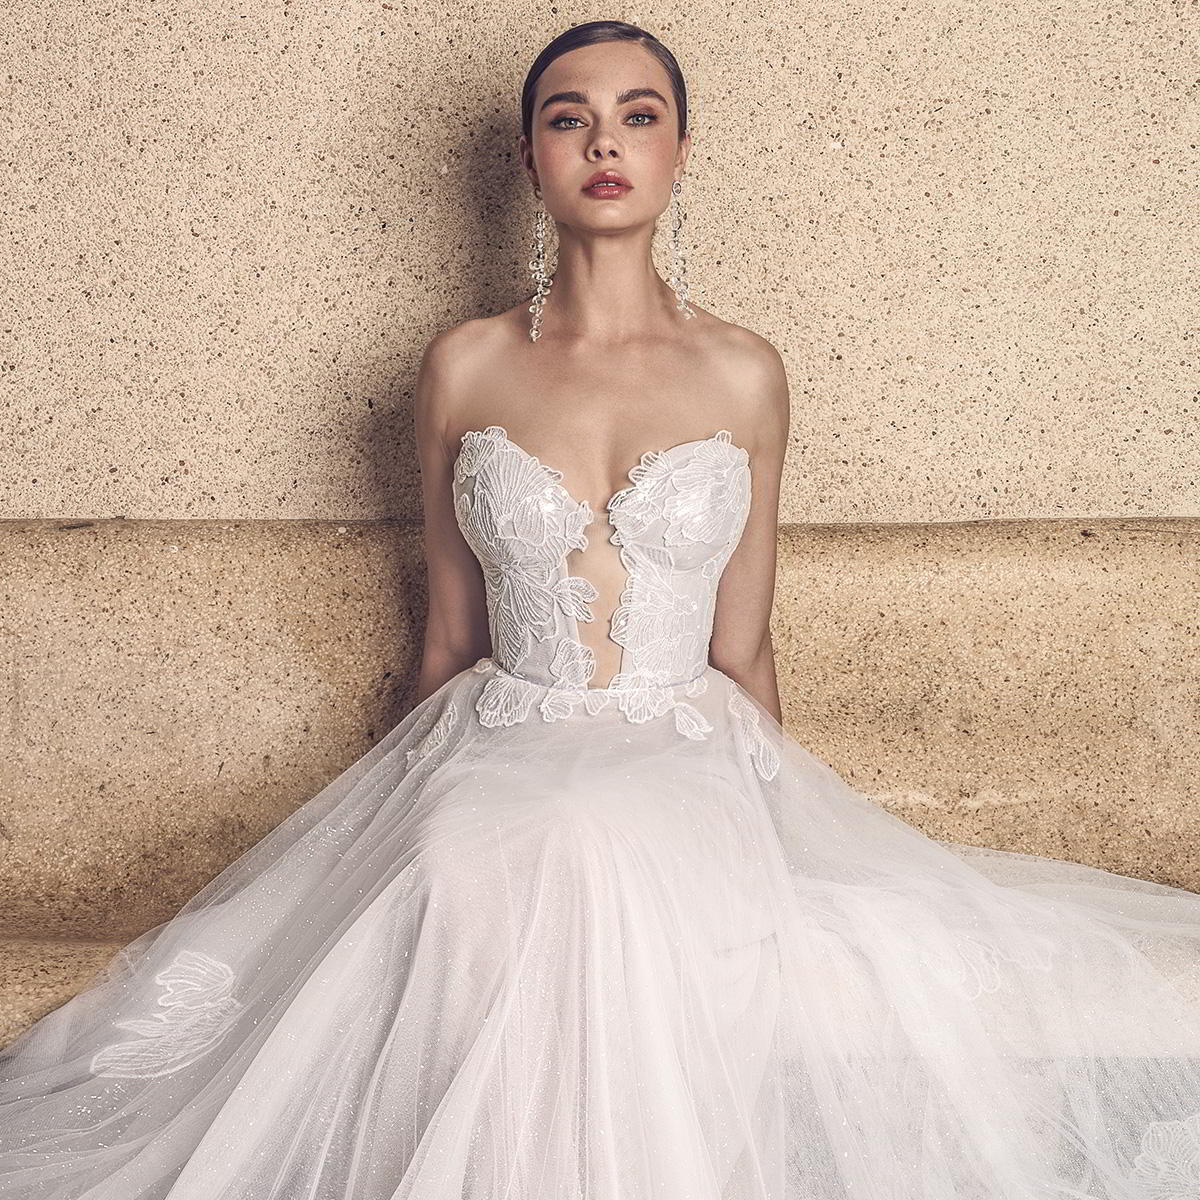 irena burshtein 2020 bridal wedding inspirasi featured wedding gowns dresses and collection